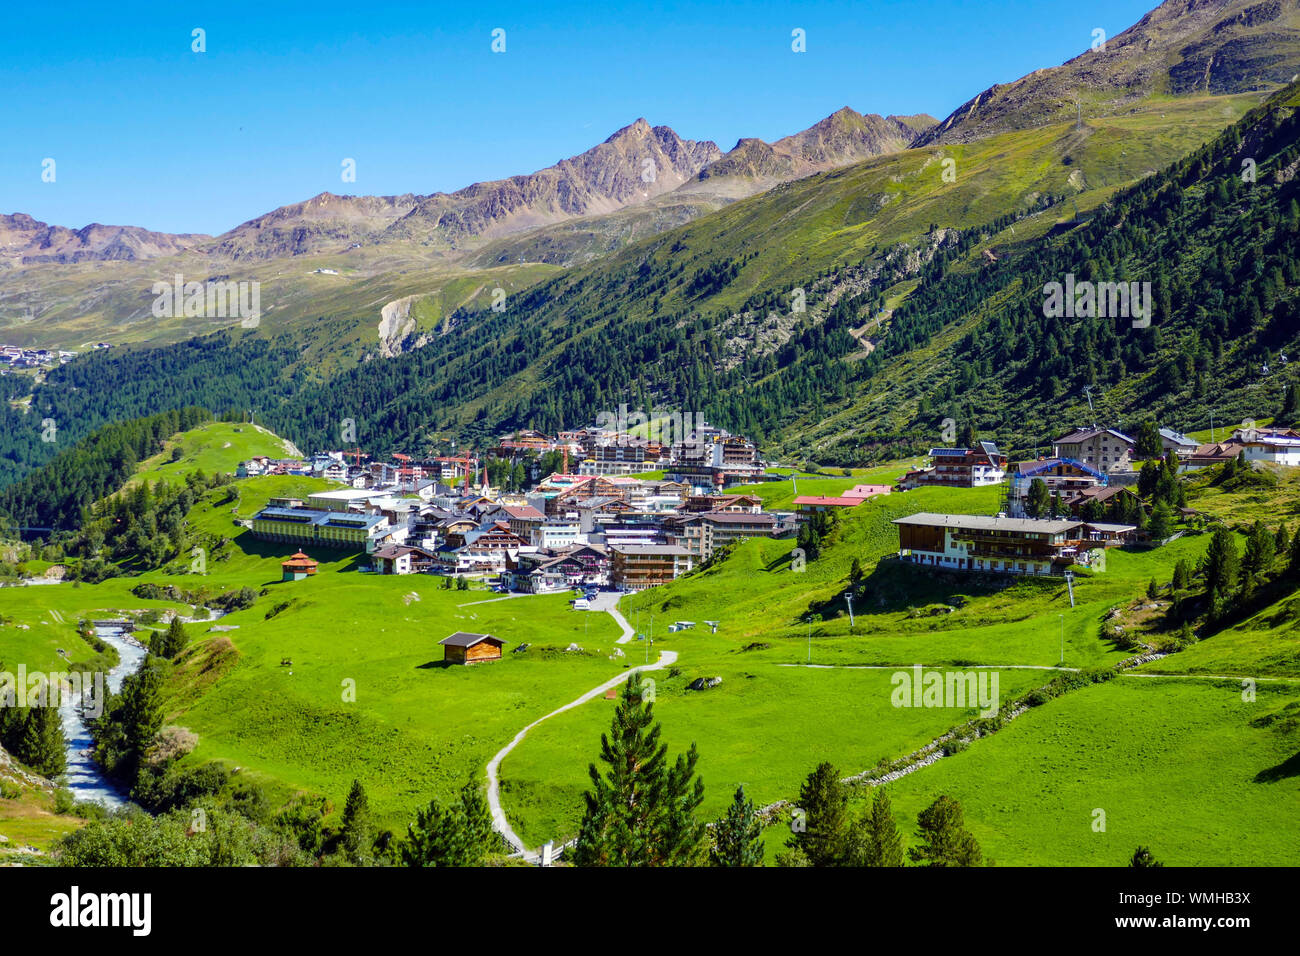 Green mountains and blue sunny day at Obergurgl, Ötztal Valley, Austria, Stock Photo